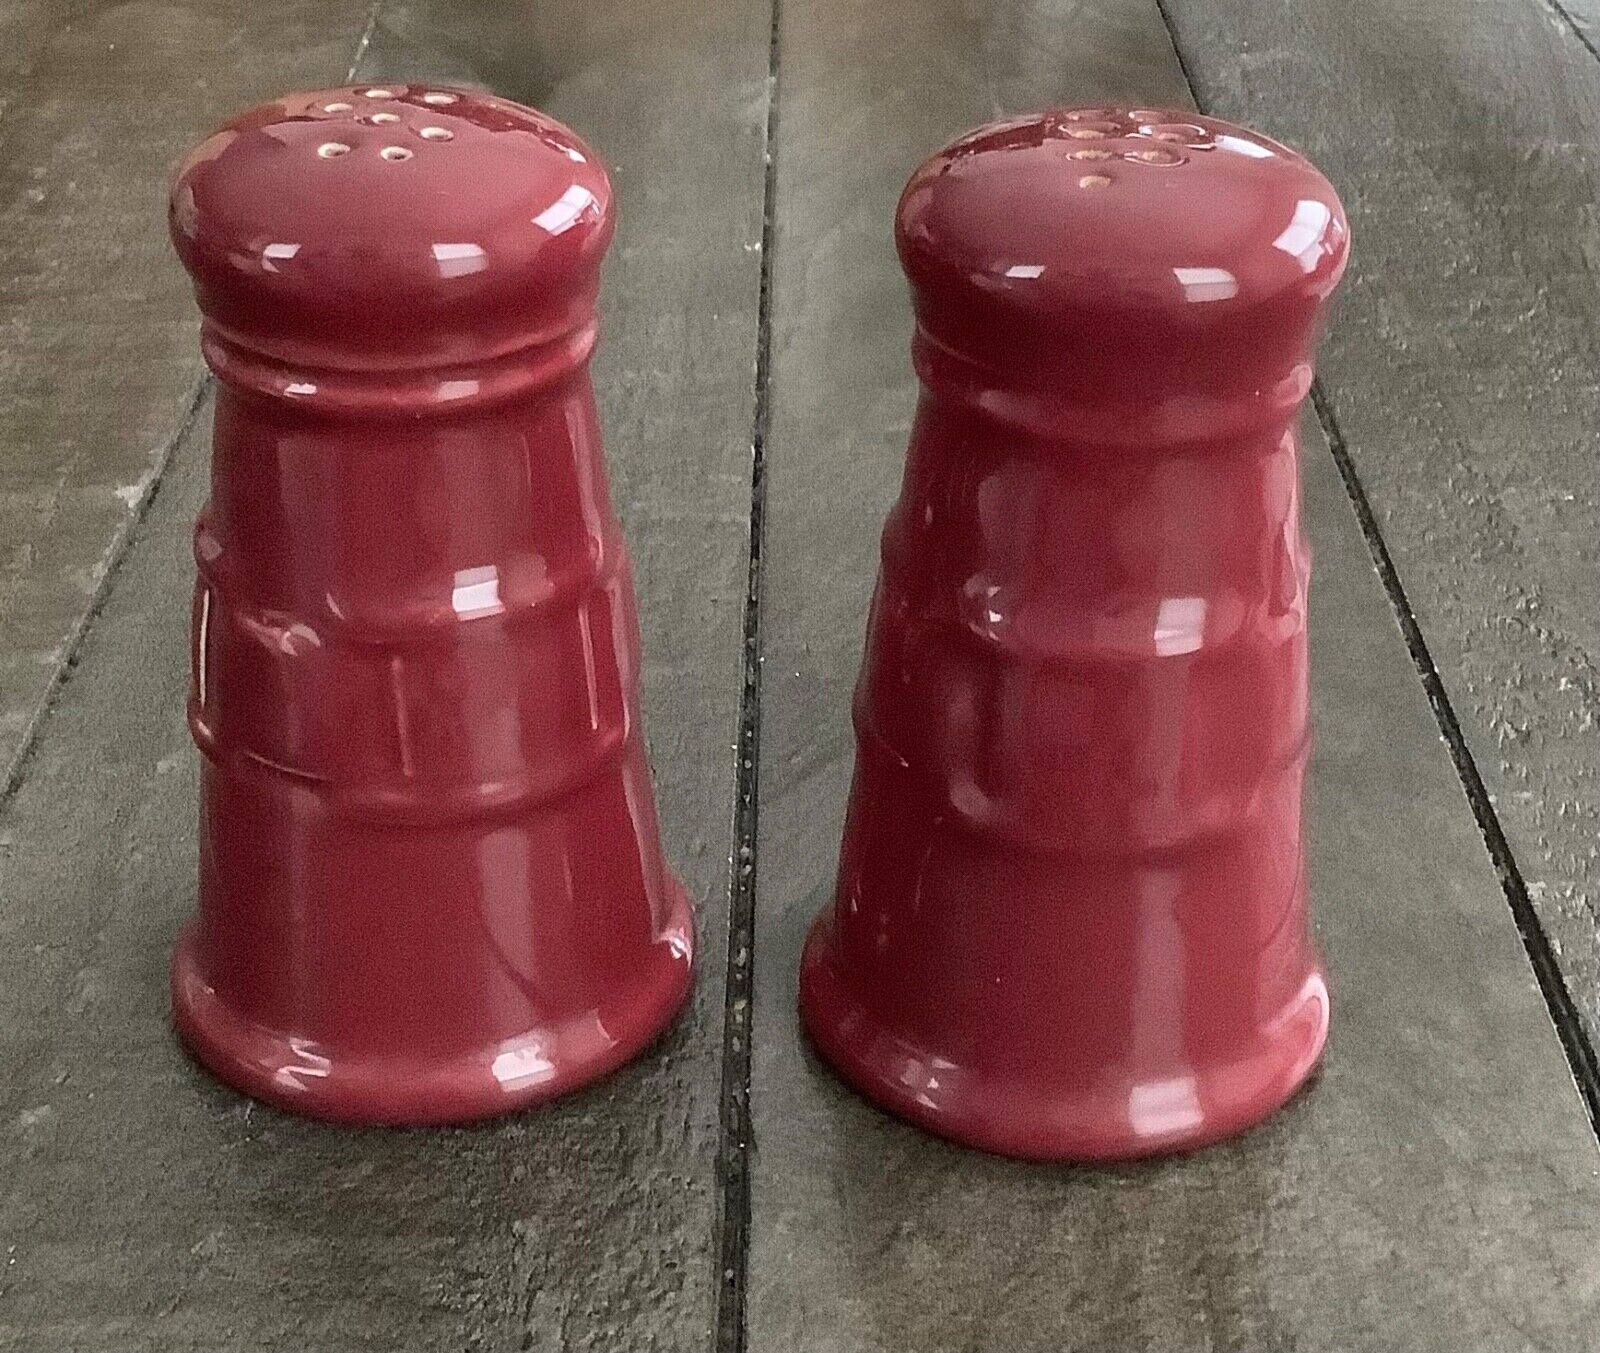 Longaberger Woven Traditions 3 3/4” PAPRIKA Red Round Salt & Pepper Shakers